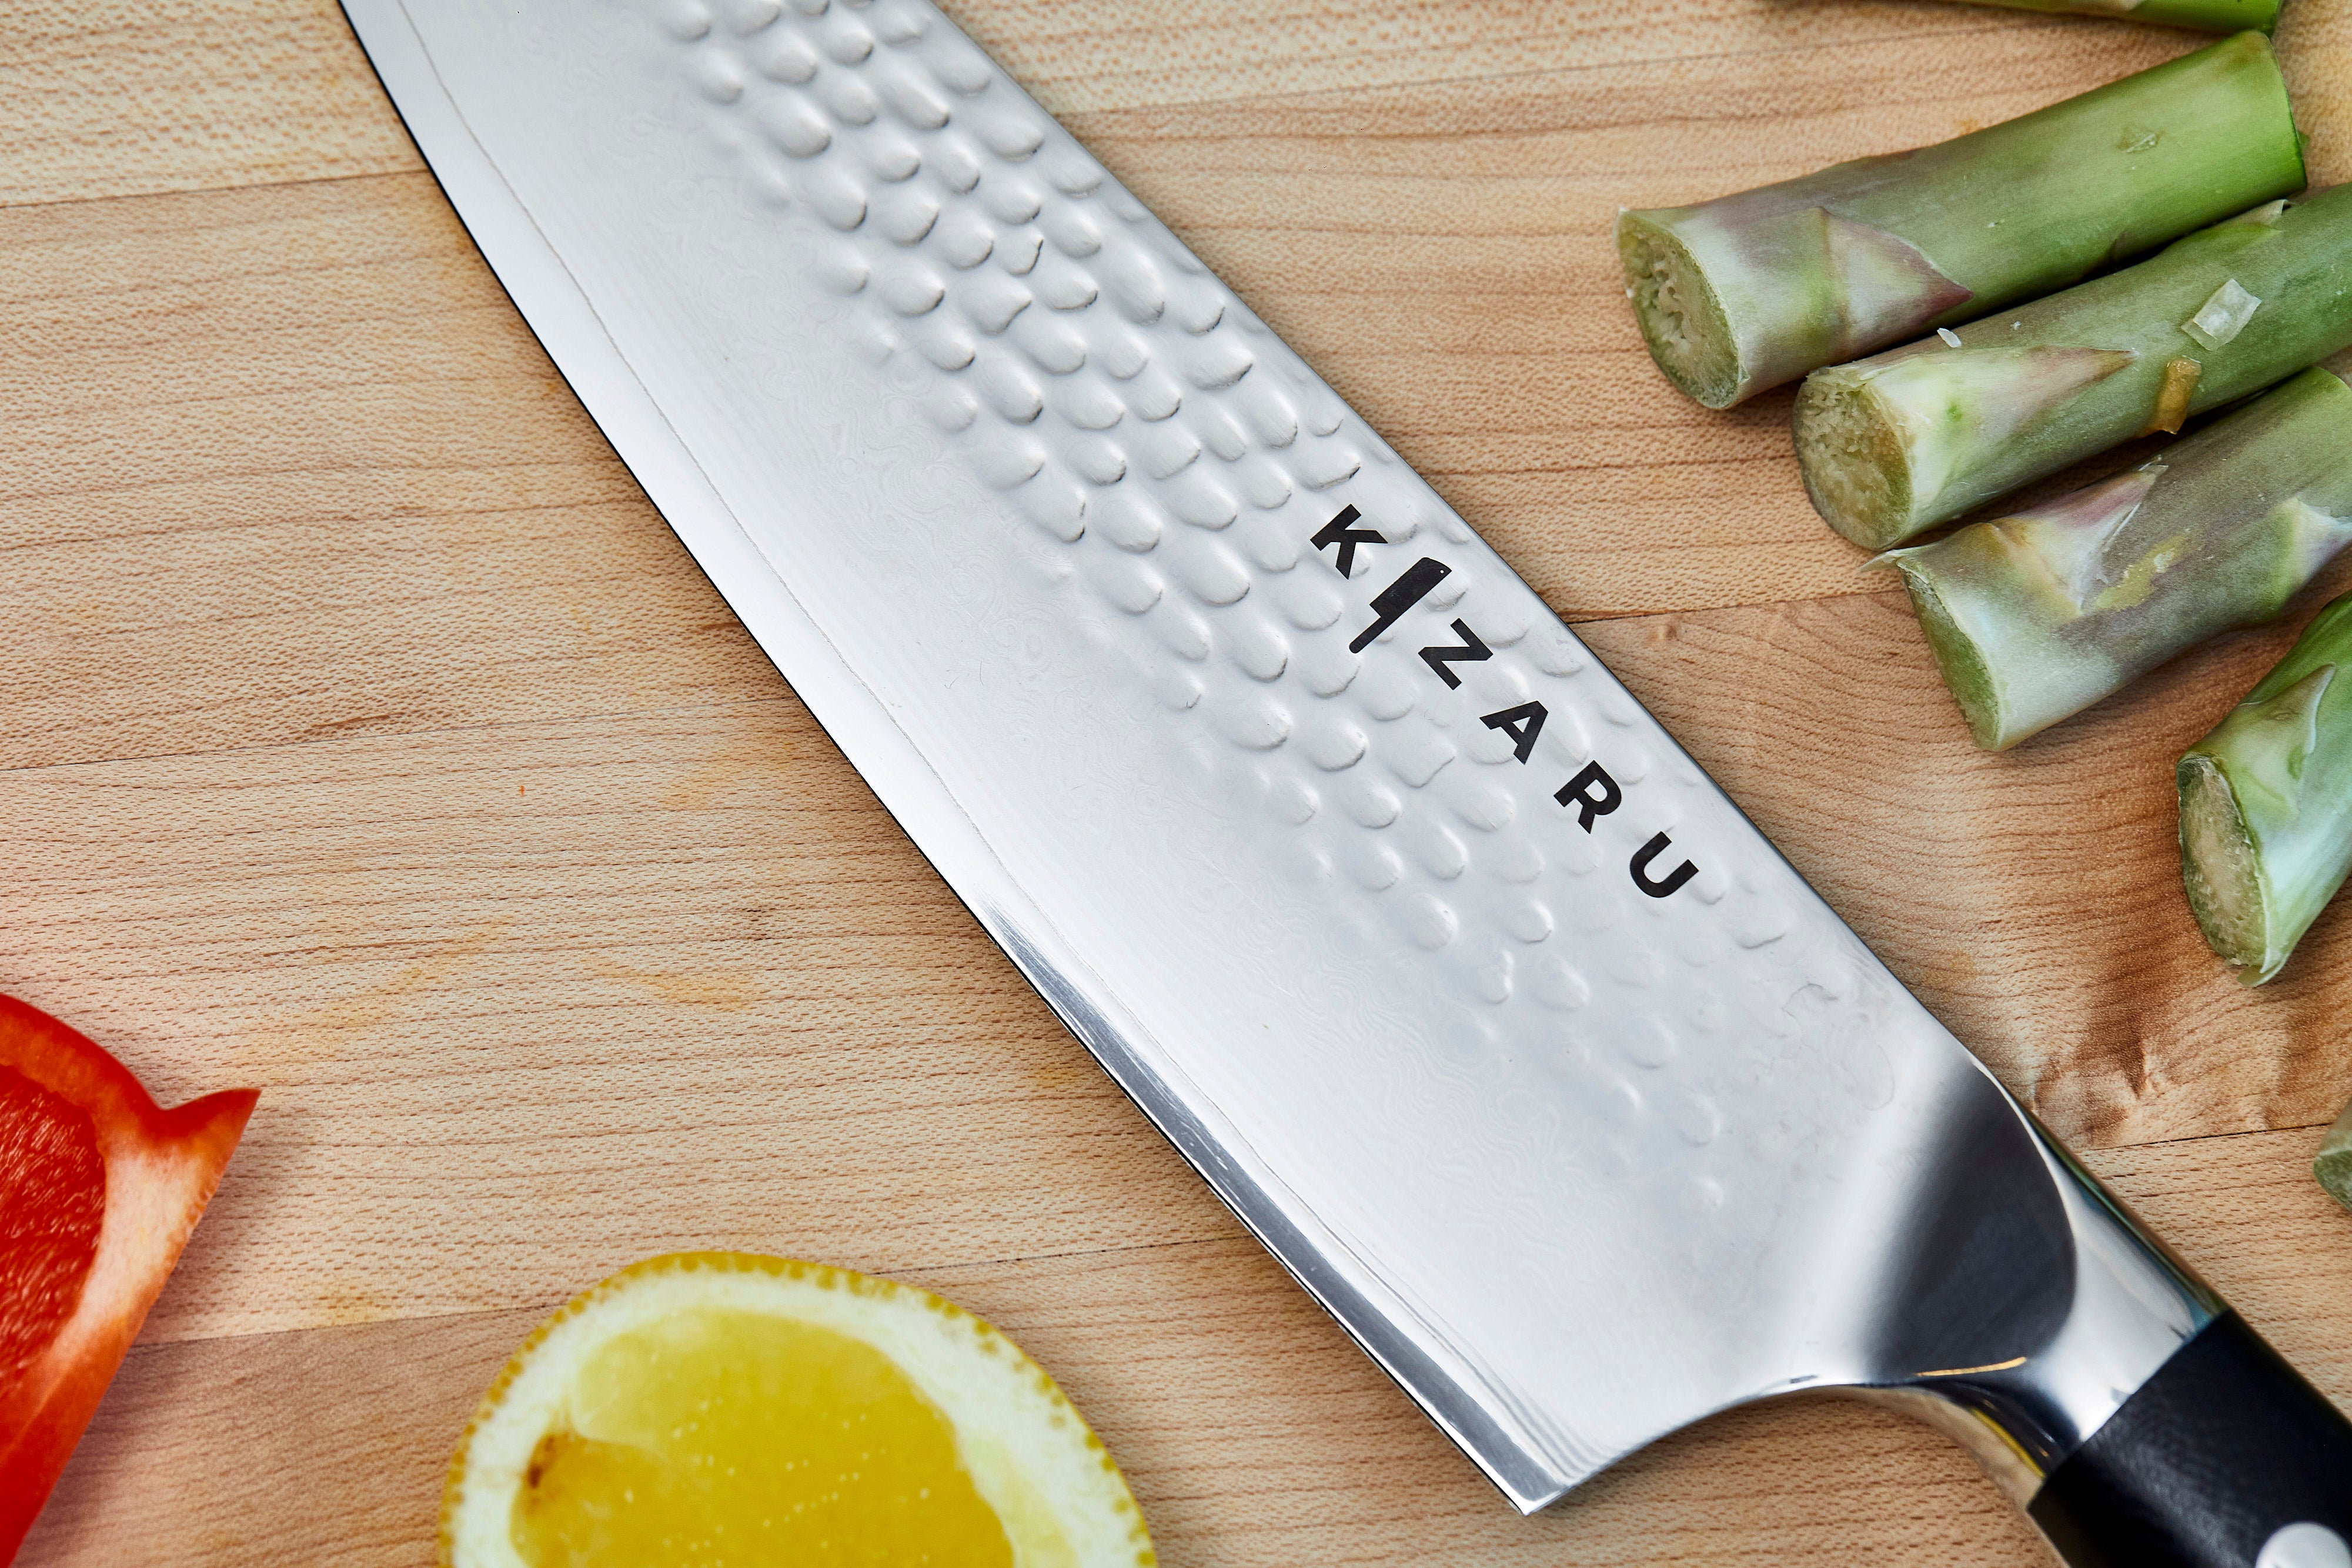 Japanese Vs. German Kitchen Knives | Which Ones Are Better?